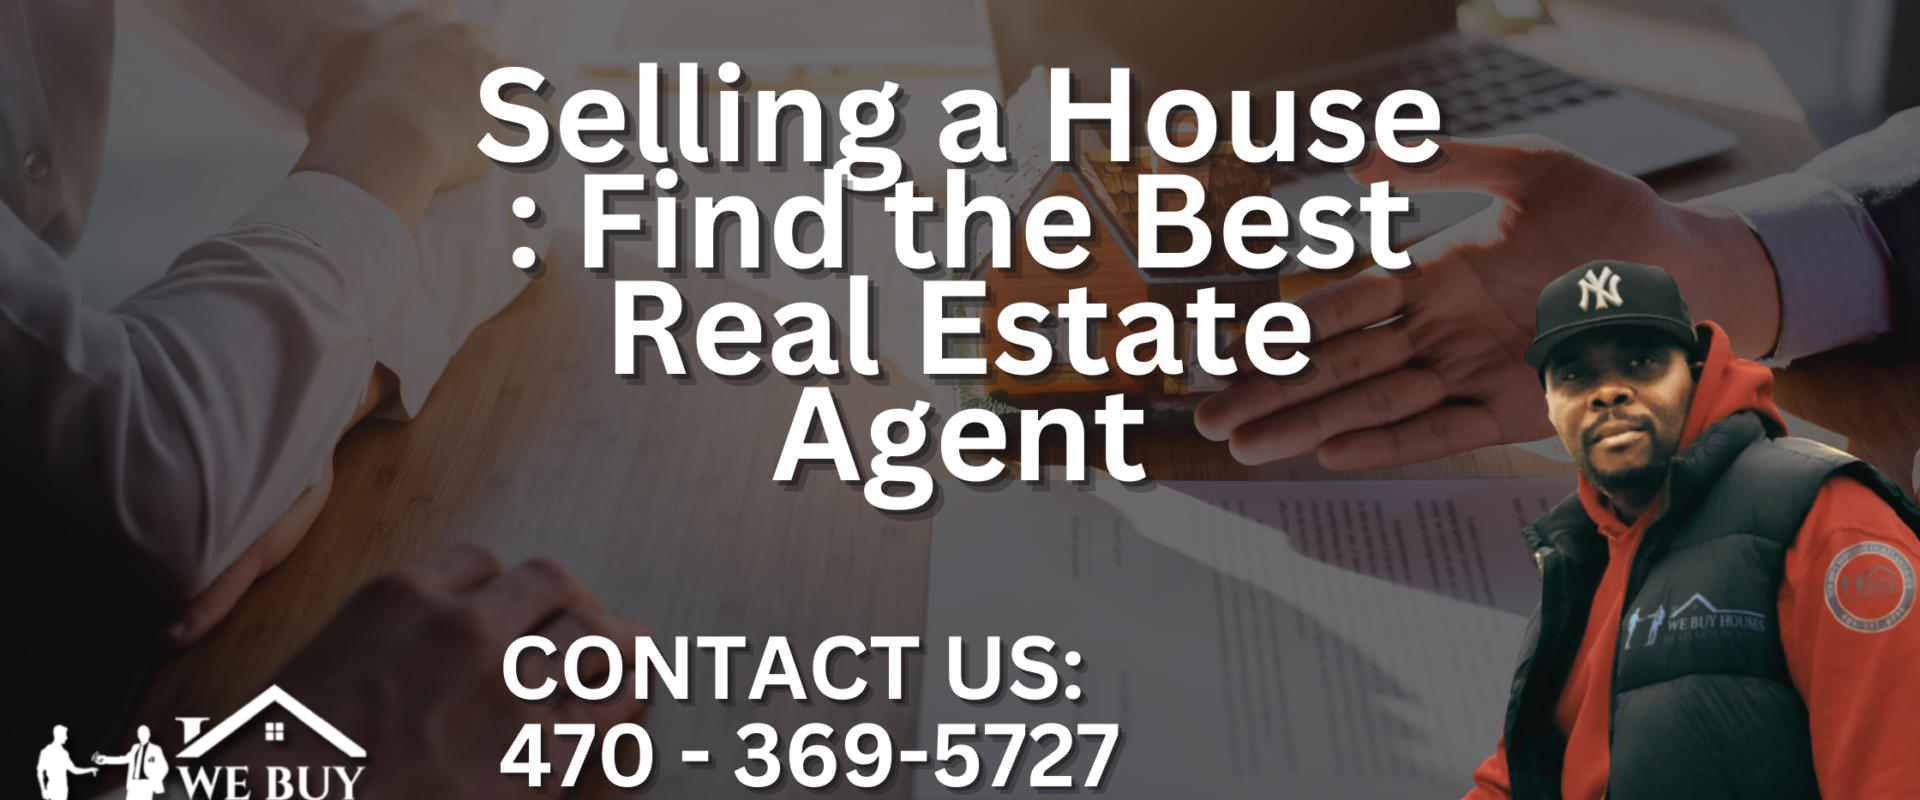 Selling a House : Find the Best Real Estate Agent